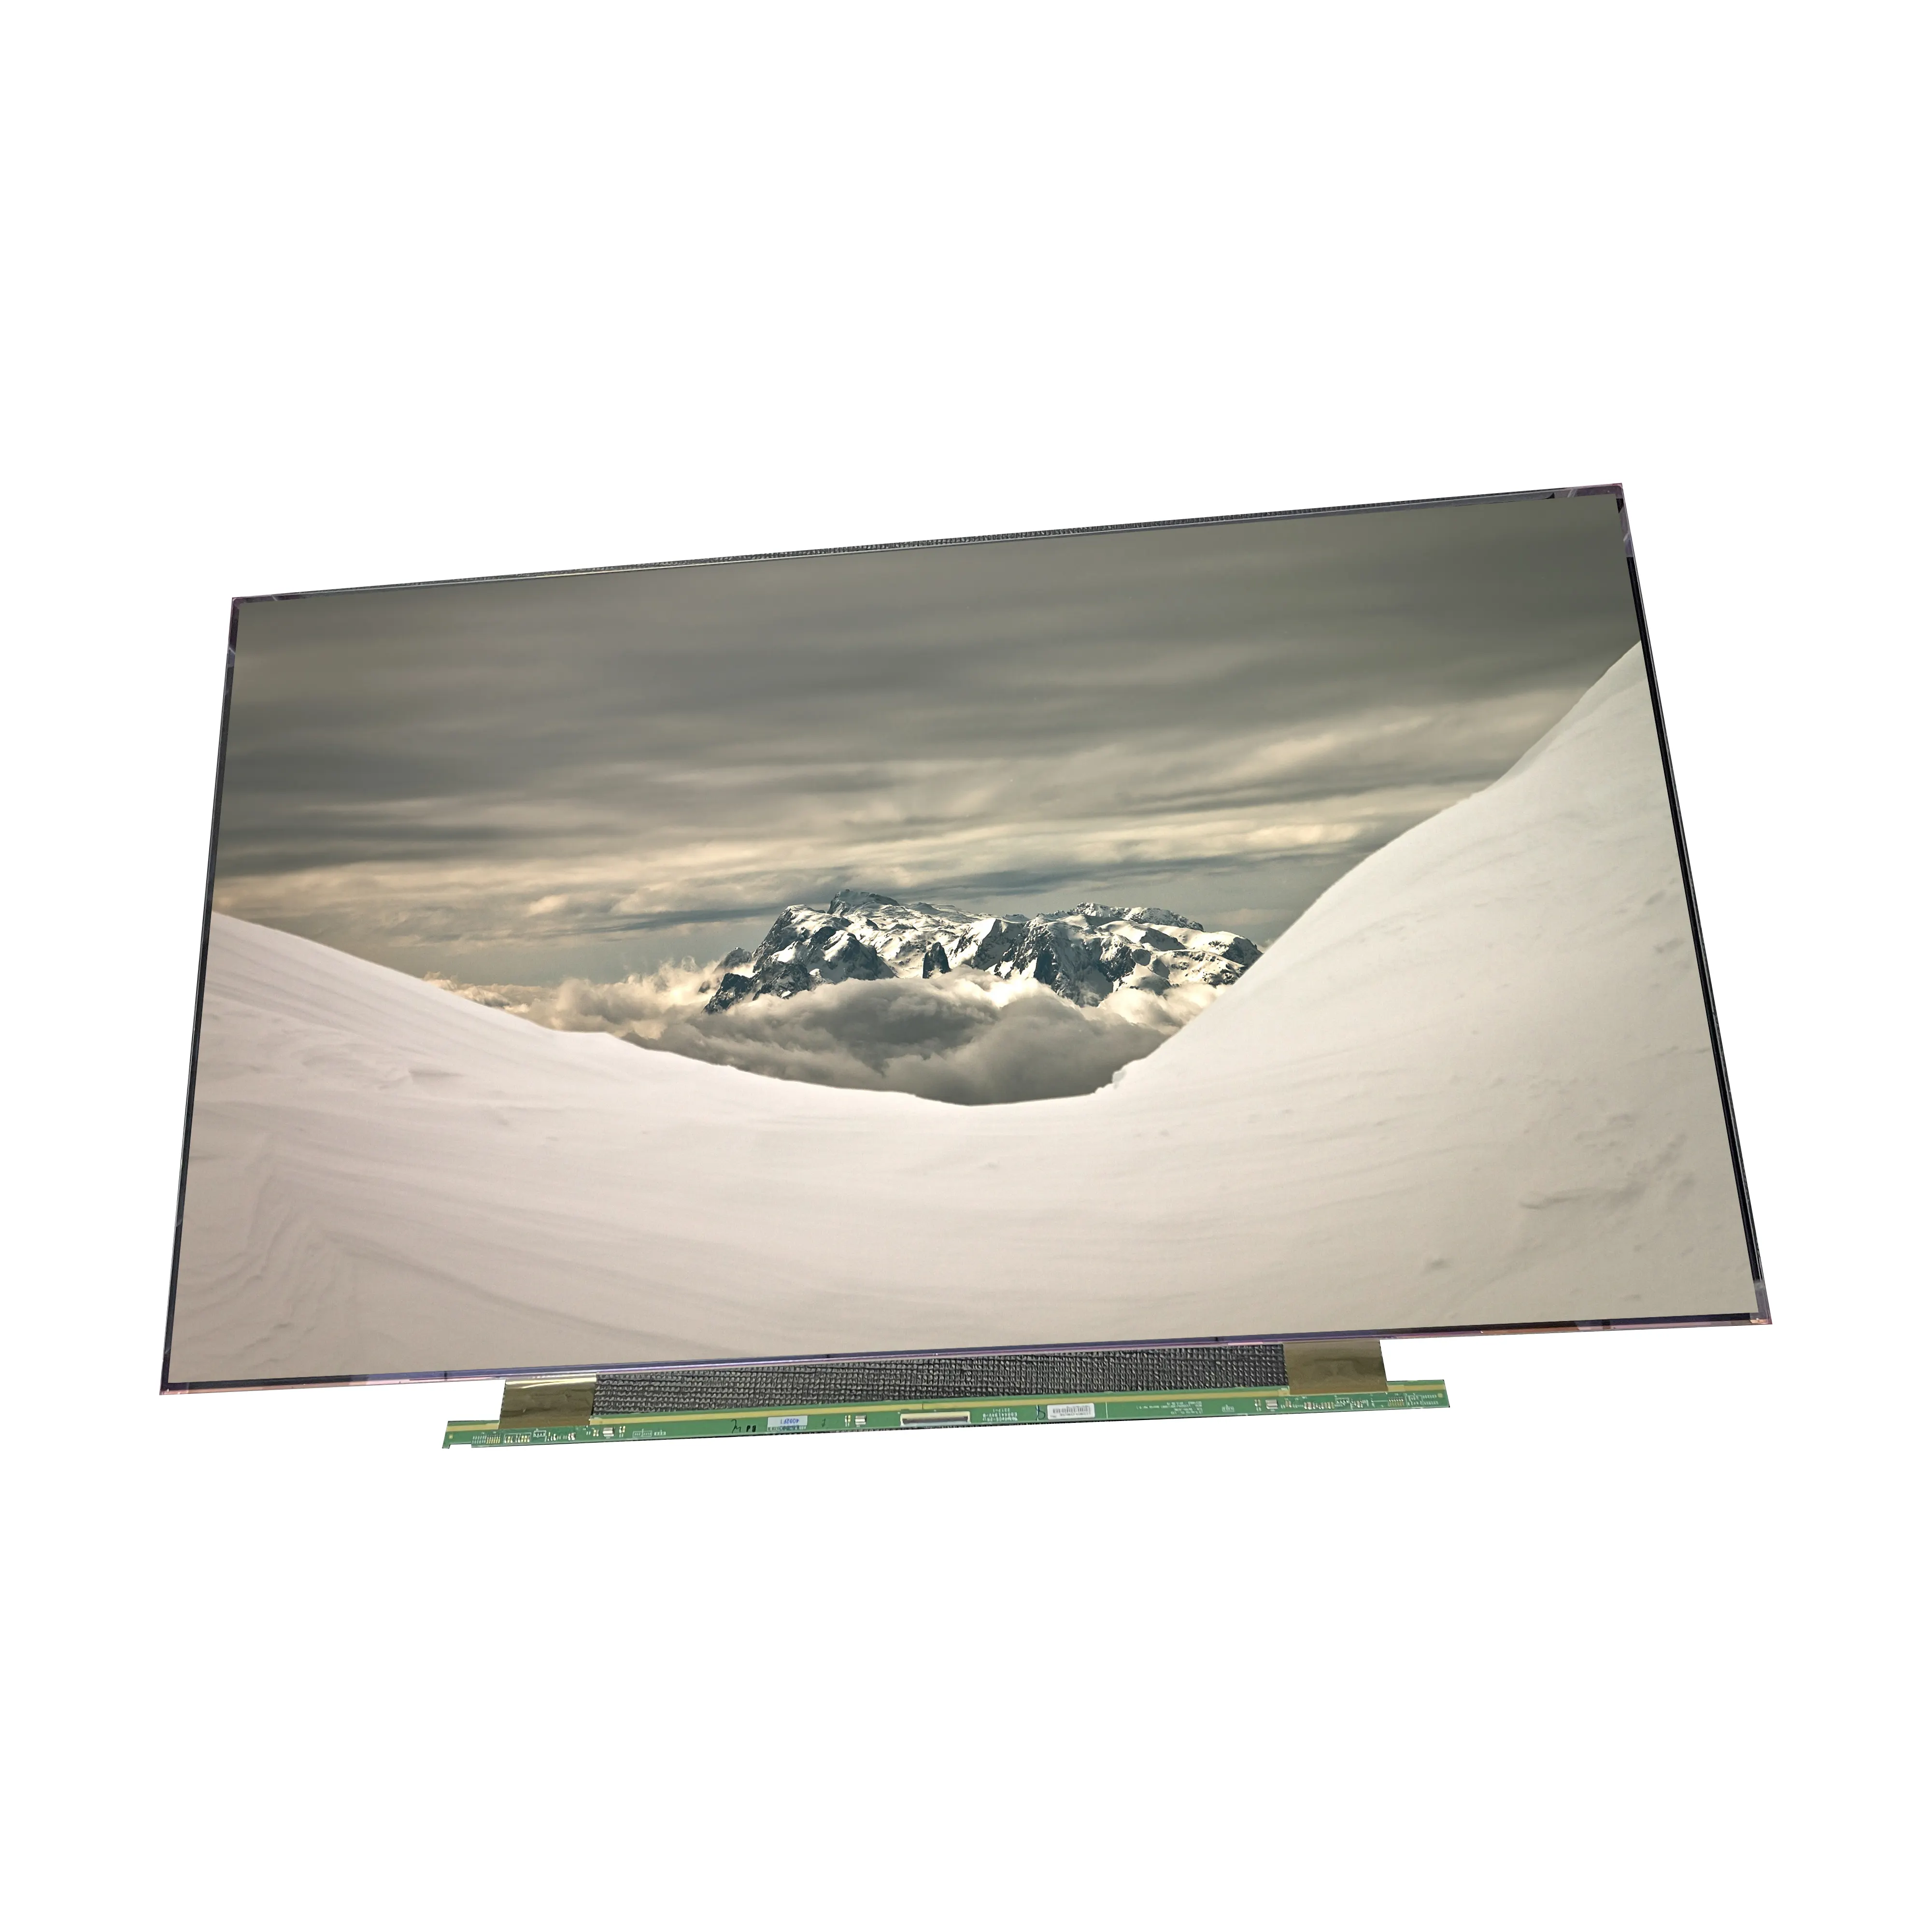 32 Inch Tv Led Screen Panel Display LC320DXC-SMA8 Lcd Tv Screen Voor Lg Flat Screen Tv 32 Inch